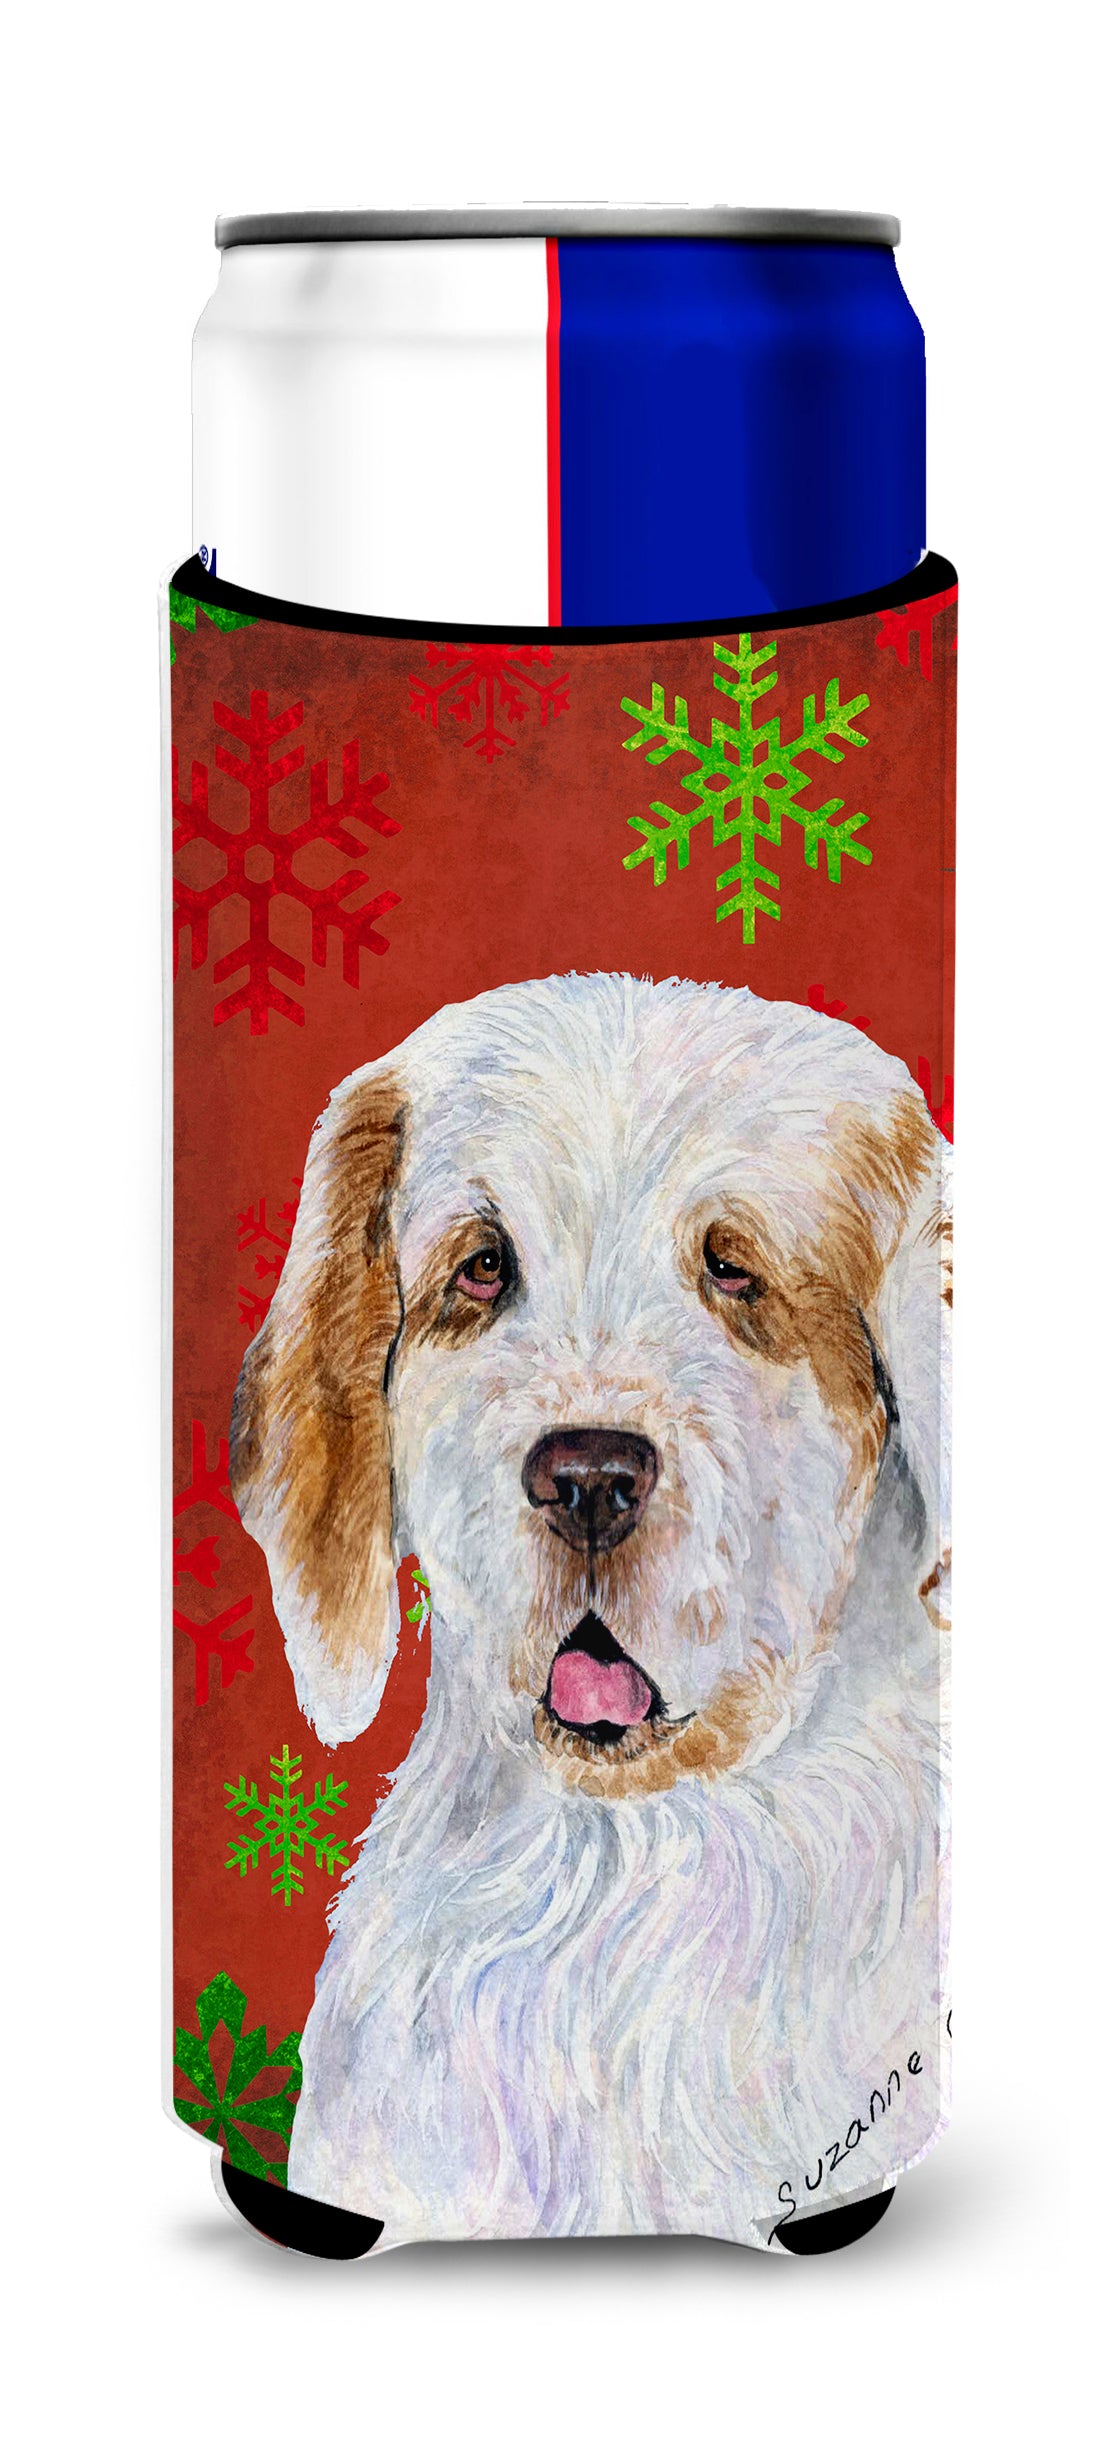 Clumber Spaniel Red and Green Snowflakes Holiday Christmas Ultra Beverage Insulators for slim cans SS4707MUK.